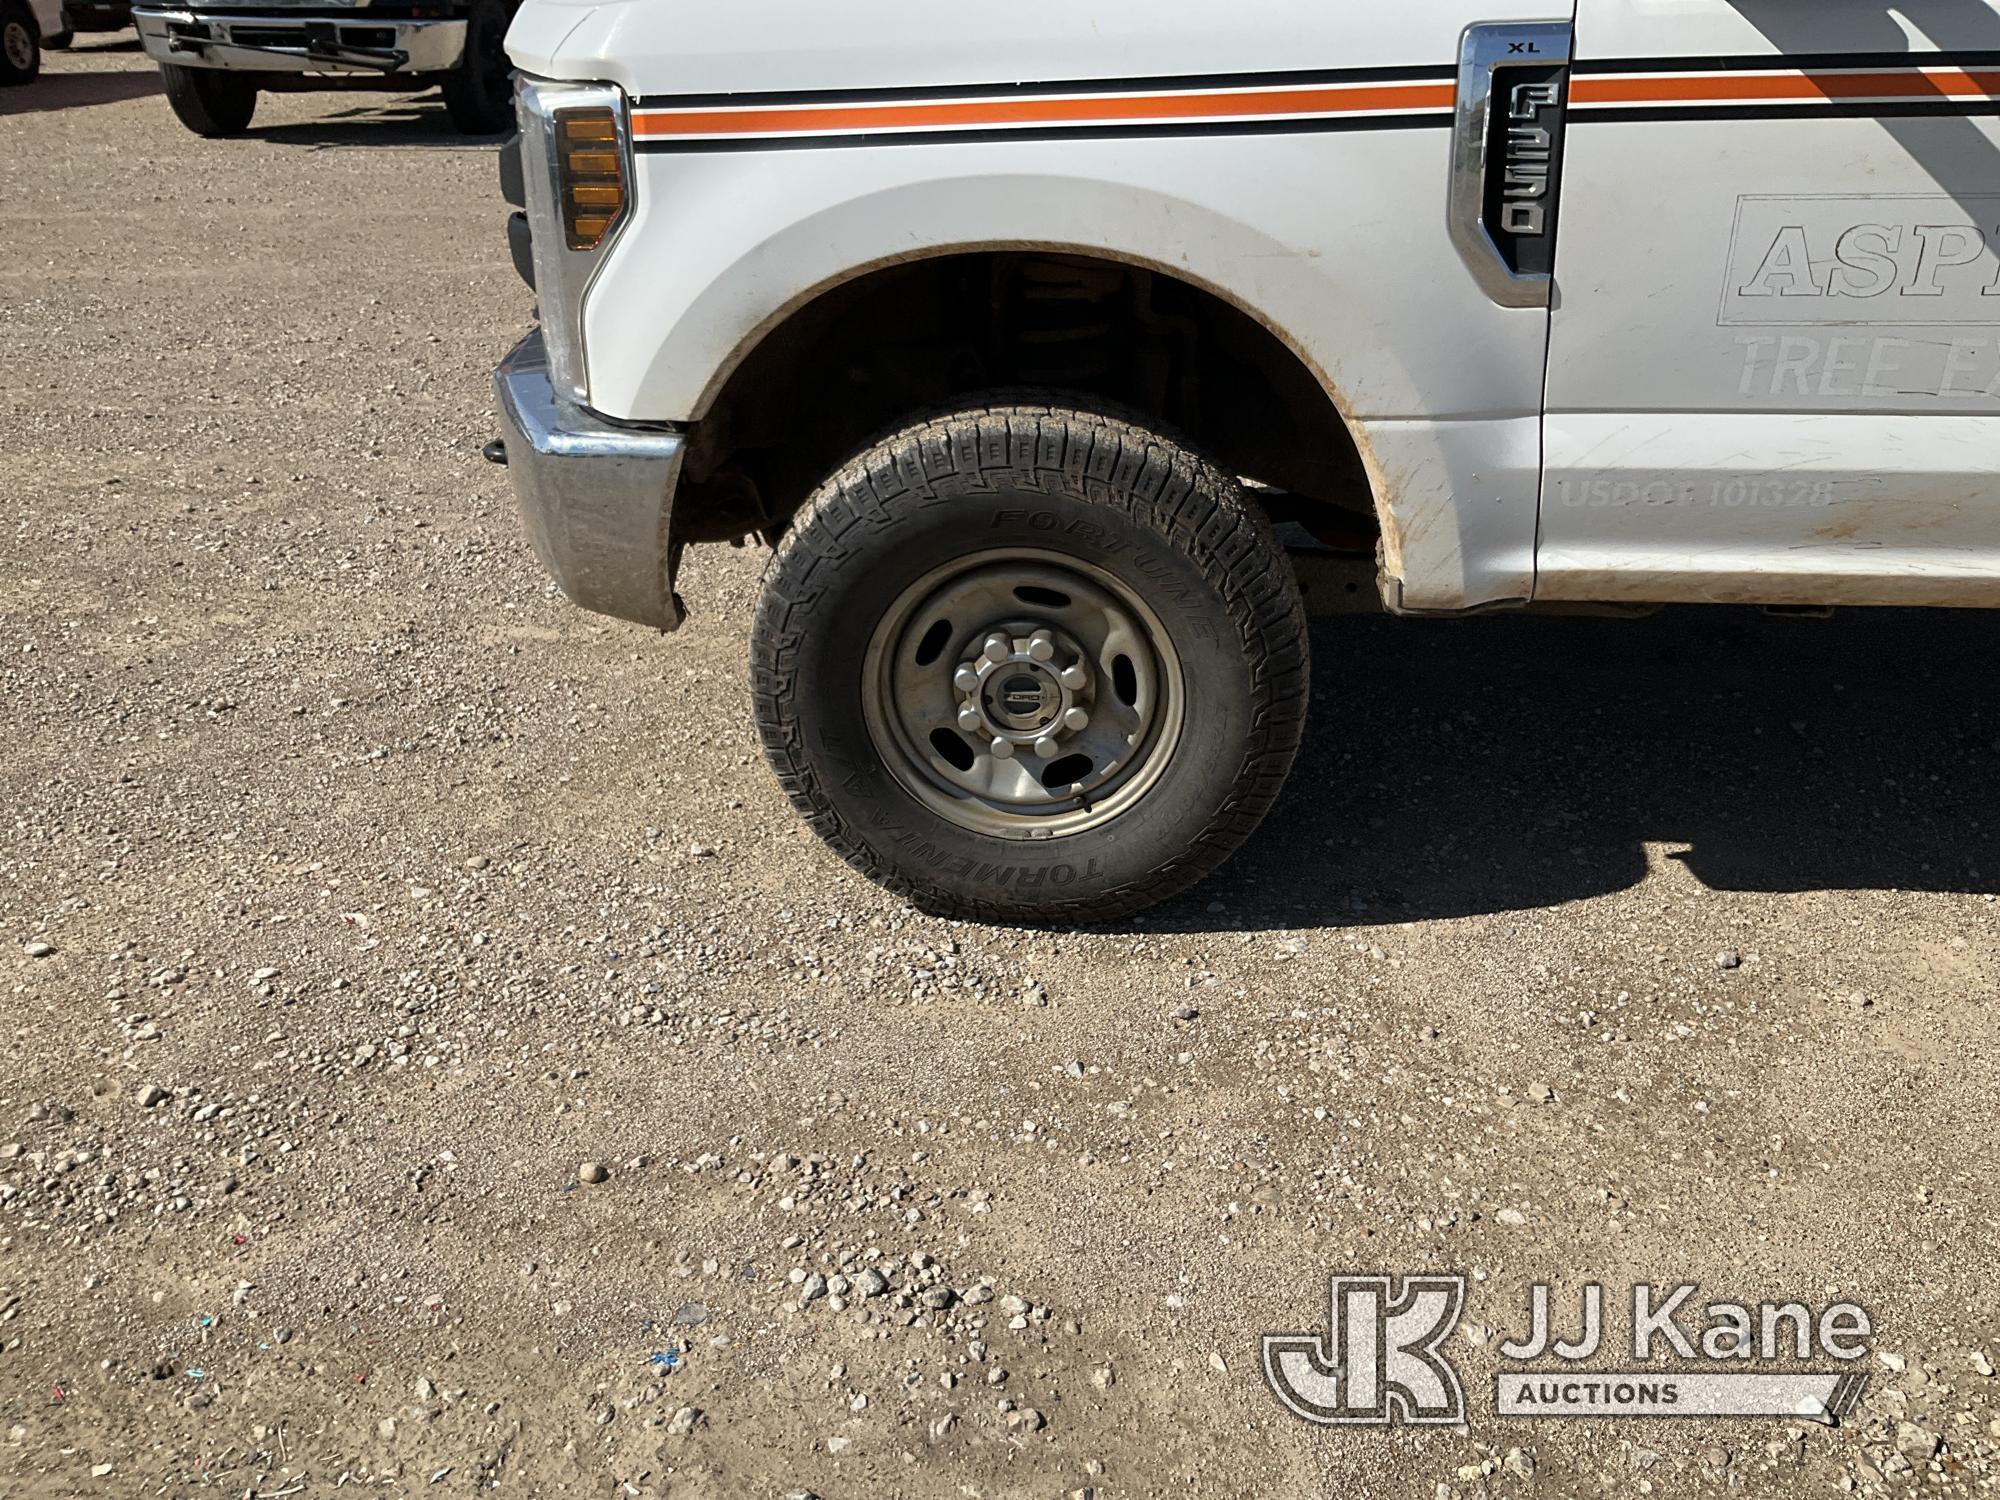 (Waxahachie, TX) 2019 Ford F250 4x4 Extended-Cab Pickup Truck Runs & Moves) (Body Damage, Cracked Wi